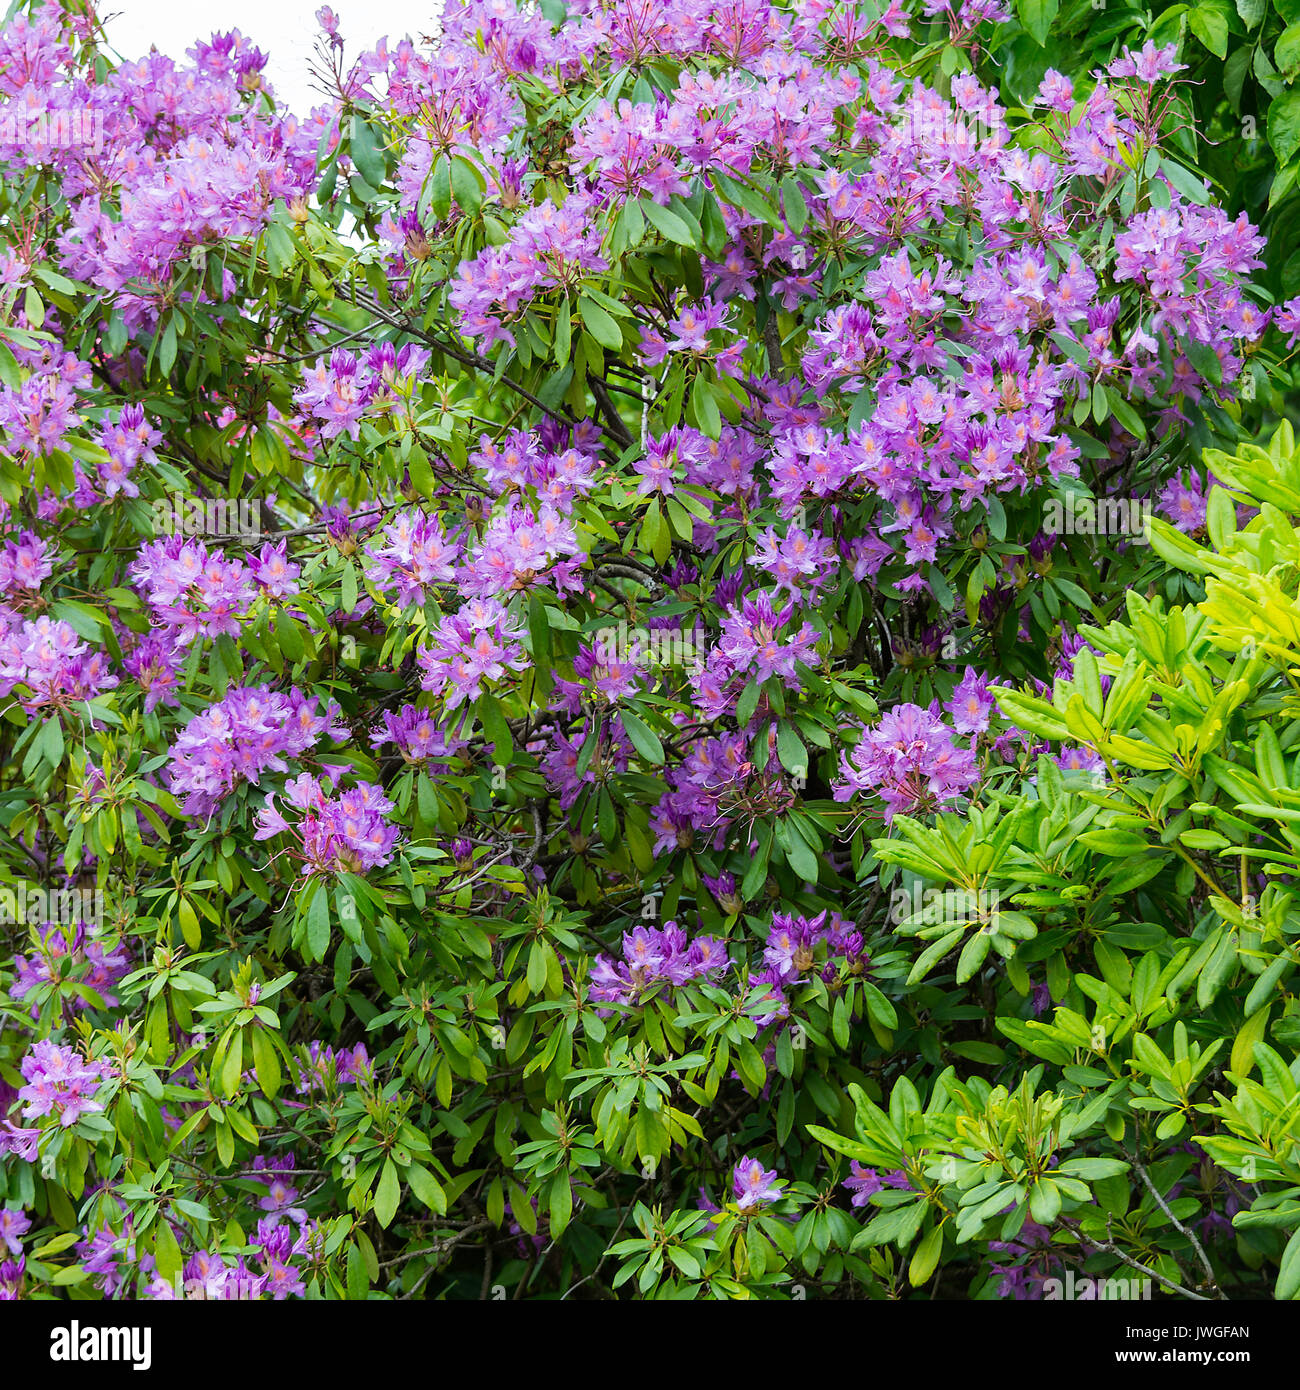 A Beautiful Purple and White Rhododendron Bushy Tree in Full Bloom in The Butchart Gardens Victoria Vancouver Island British Columbia Canada Stock Photo